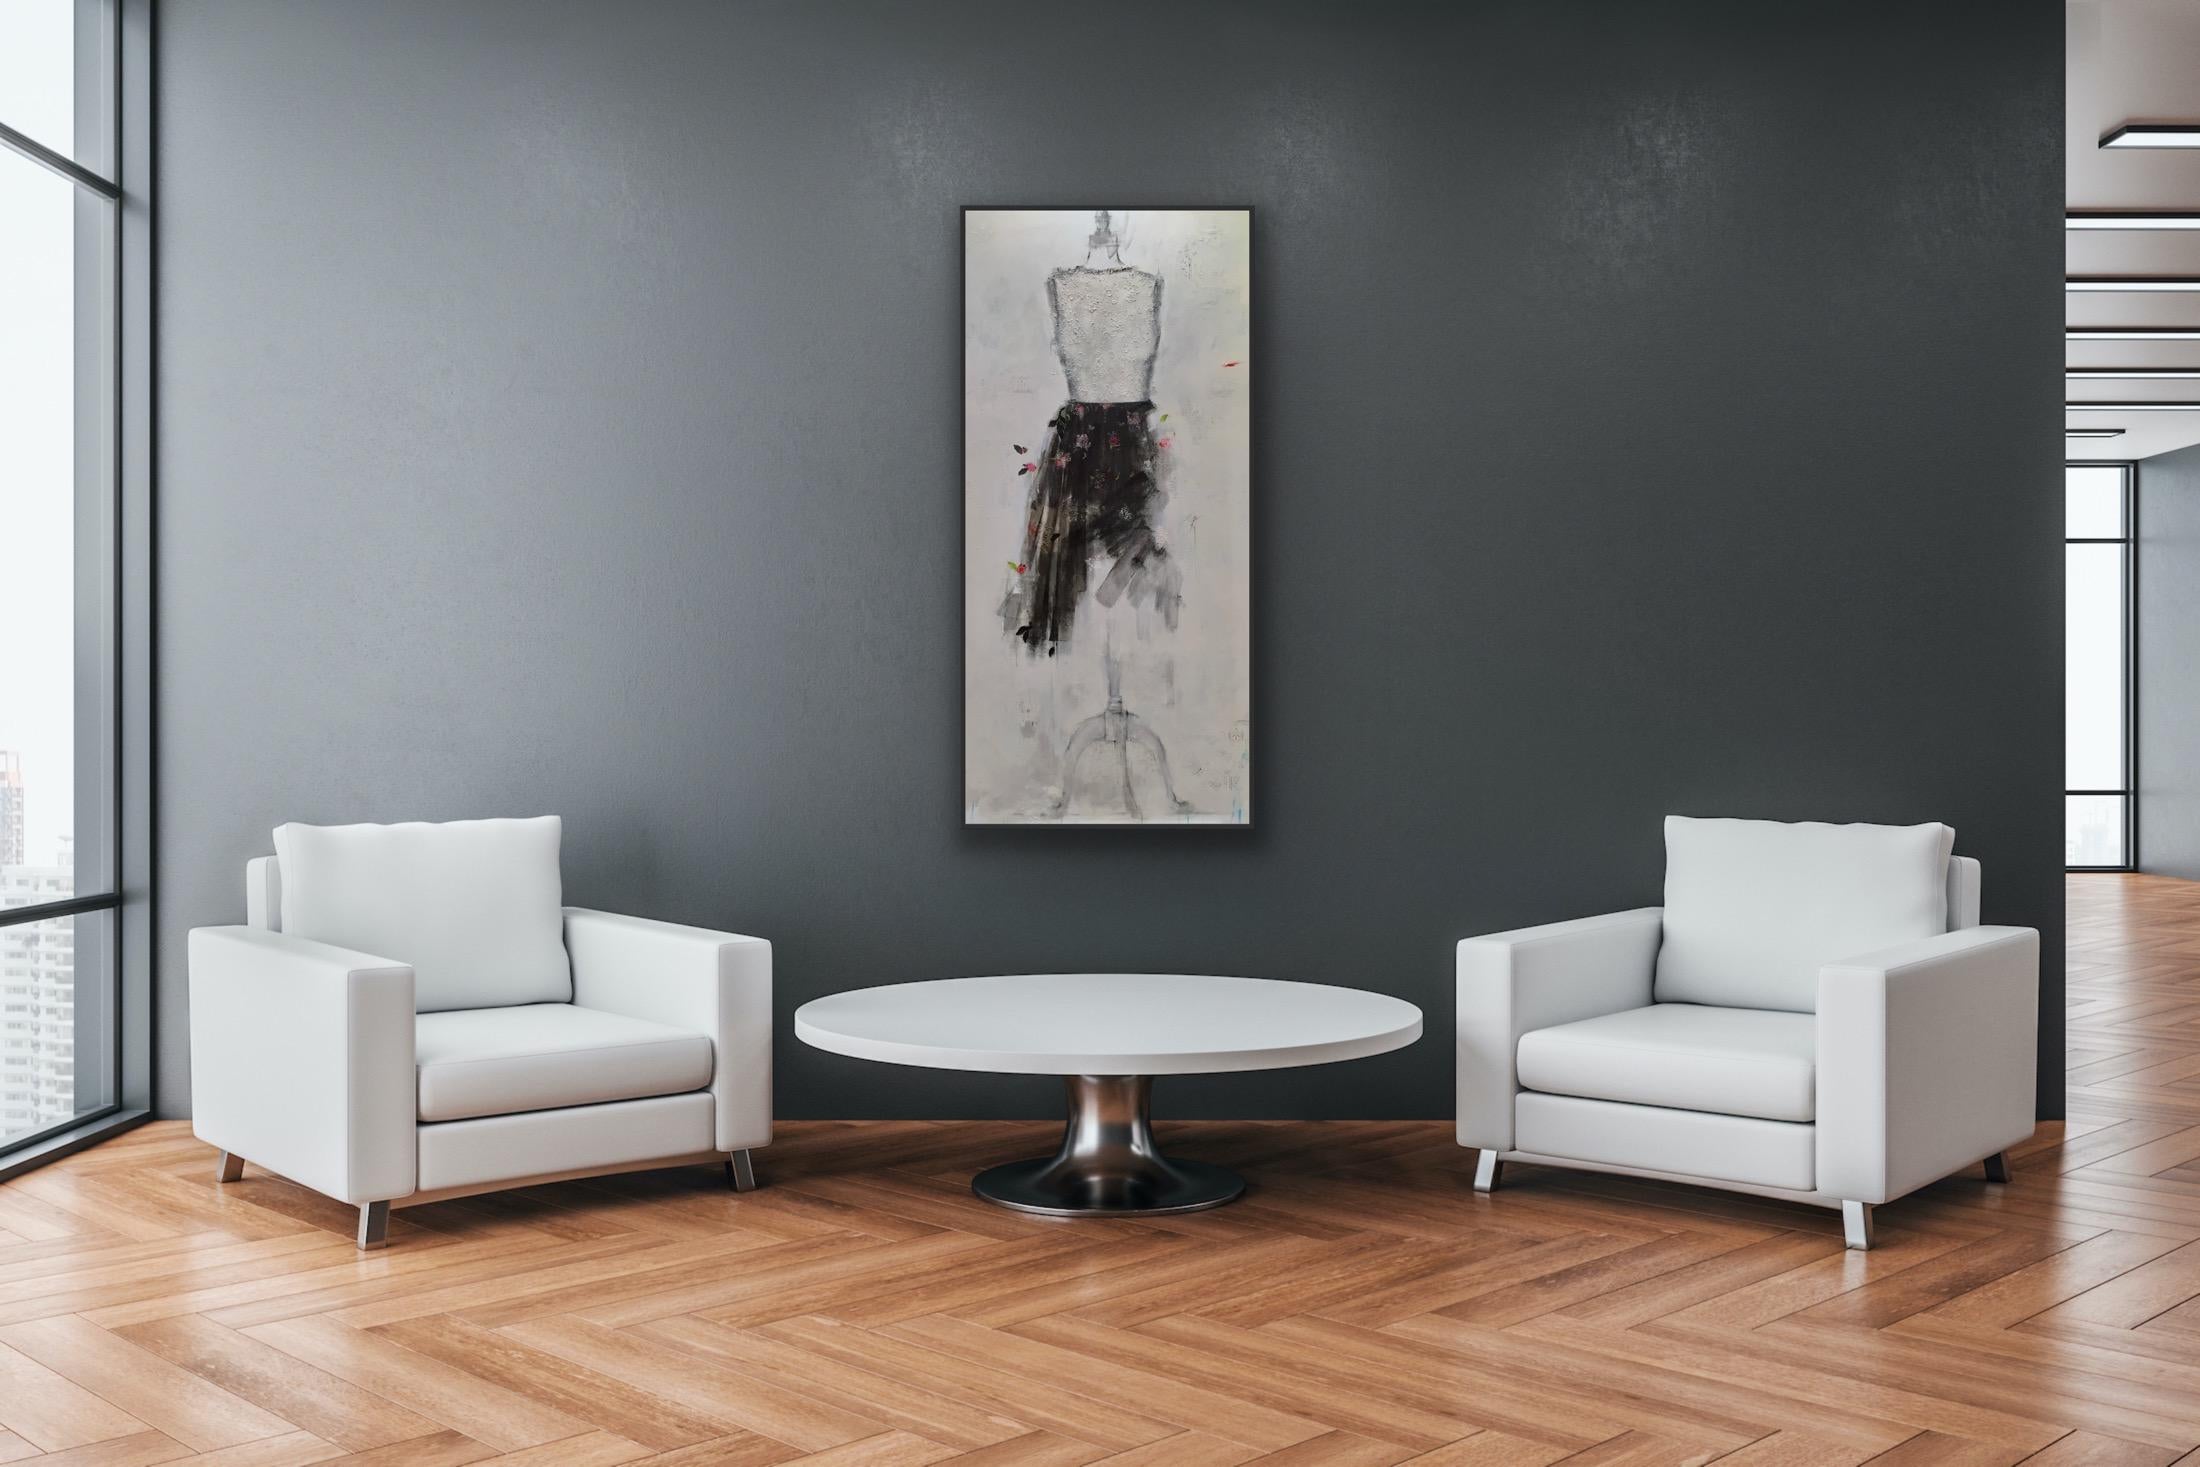 Chantilly Lace And A Pretty Place (Dress 26), 30”x60”, Black, White, Painting For Sale 14